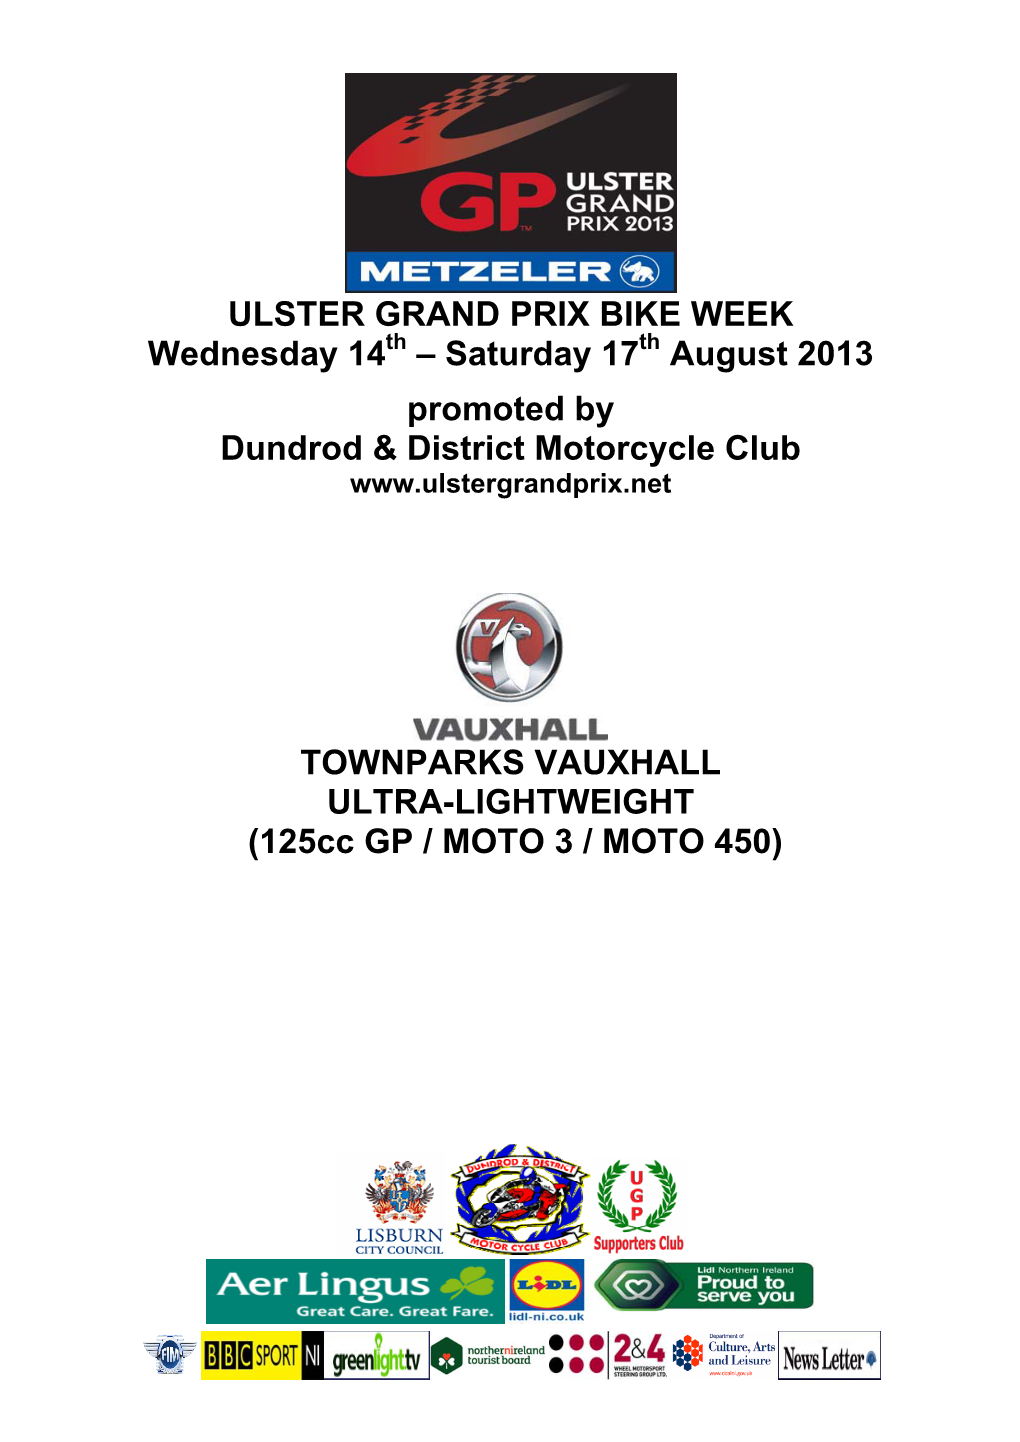 ULSTER GRAND PRIX BIKE WEEK Wednesday 14 – Saturday 17 August 2013 Promoted by Dundrod & District Motorcycle Club TOWNPARK